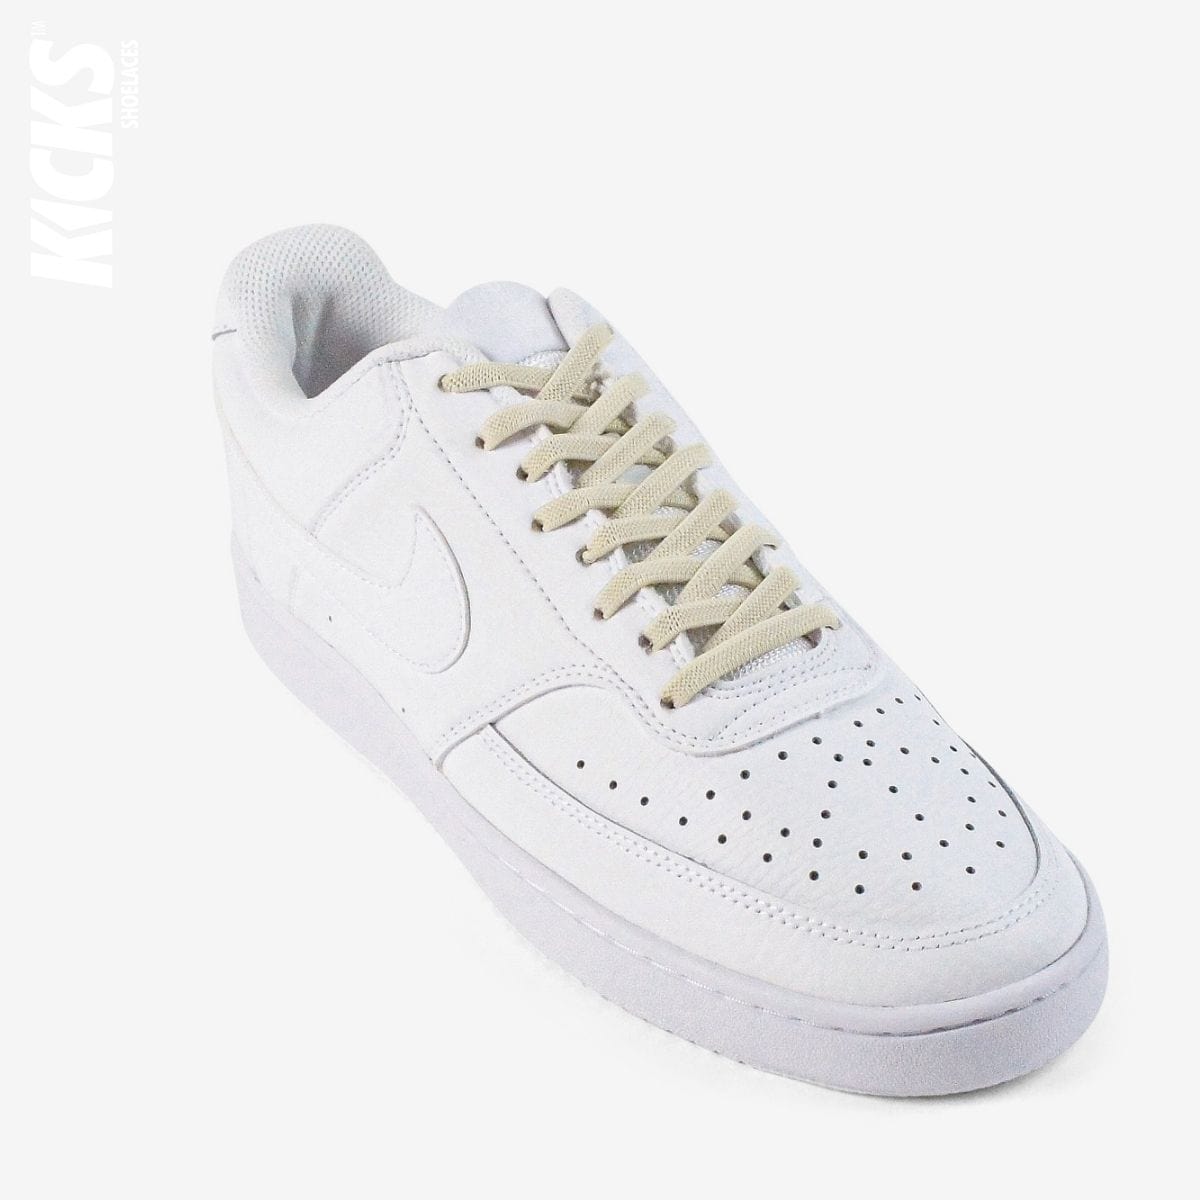 no-tie-shoelaces-with-beige-laces-on-nike-white-sneakers-by-kicks-shoelaces